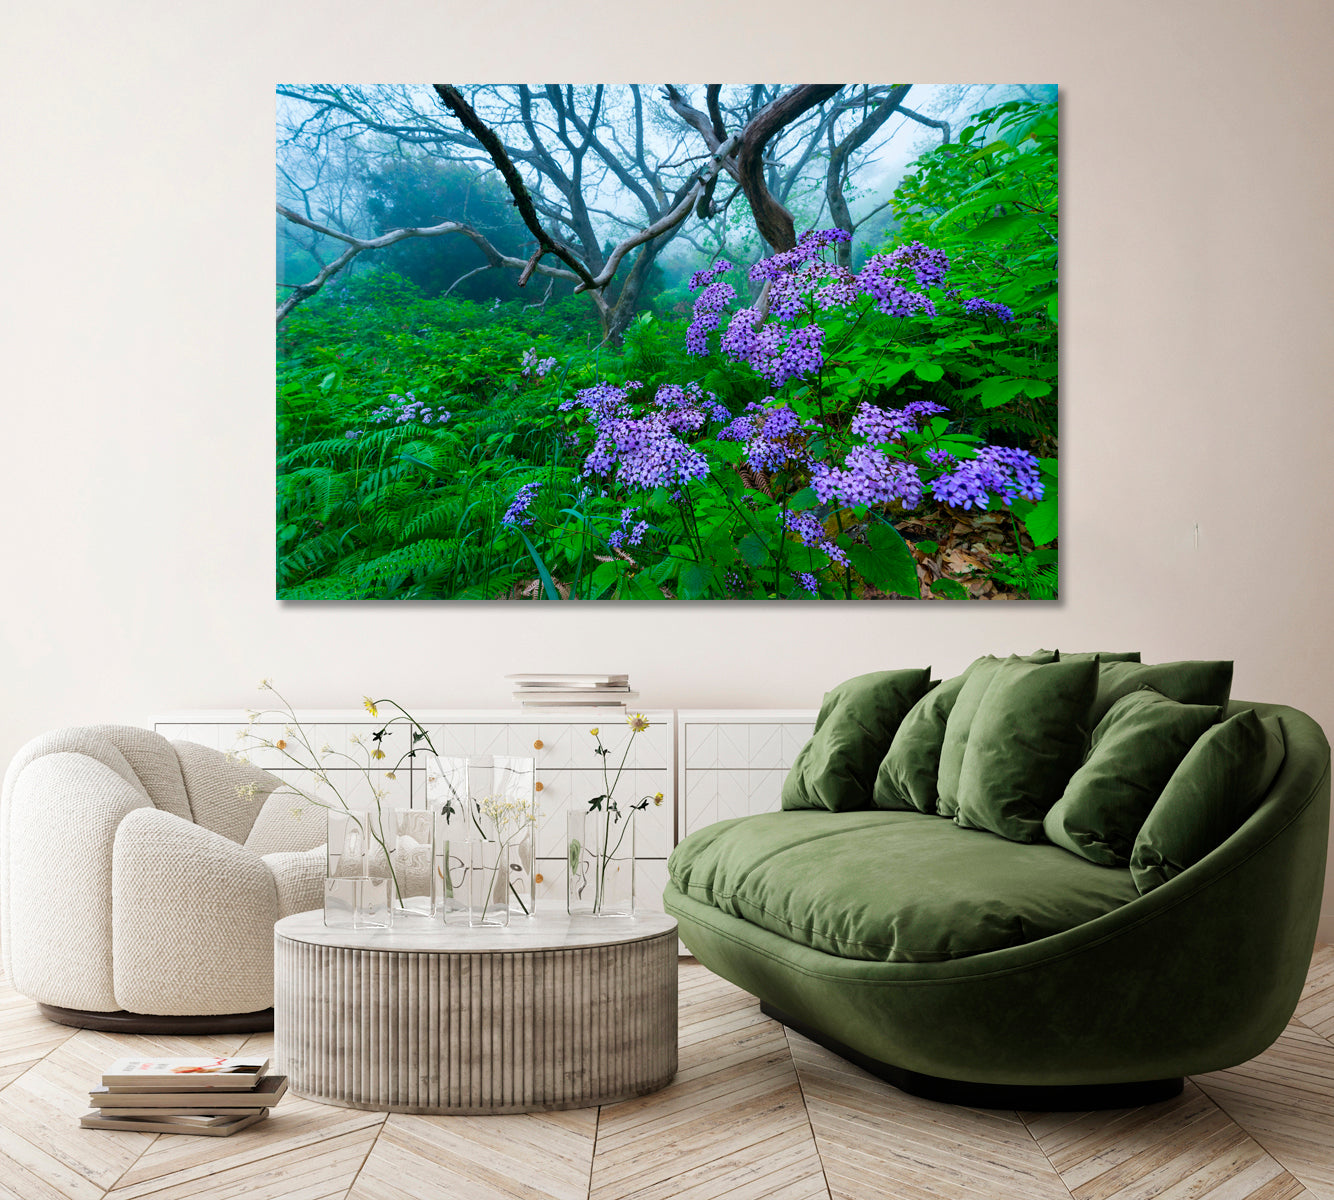 Wild Flowers on Canary Islands Spain Canvas Print ArtLexy 1 Panel 24"x16" inches 